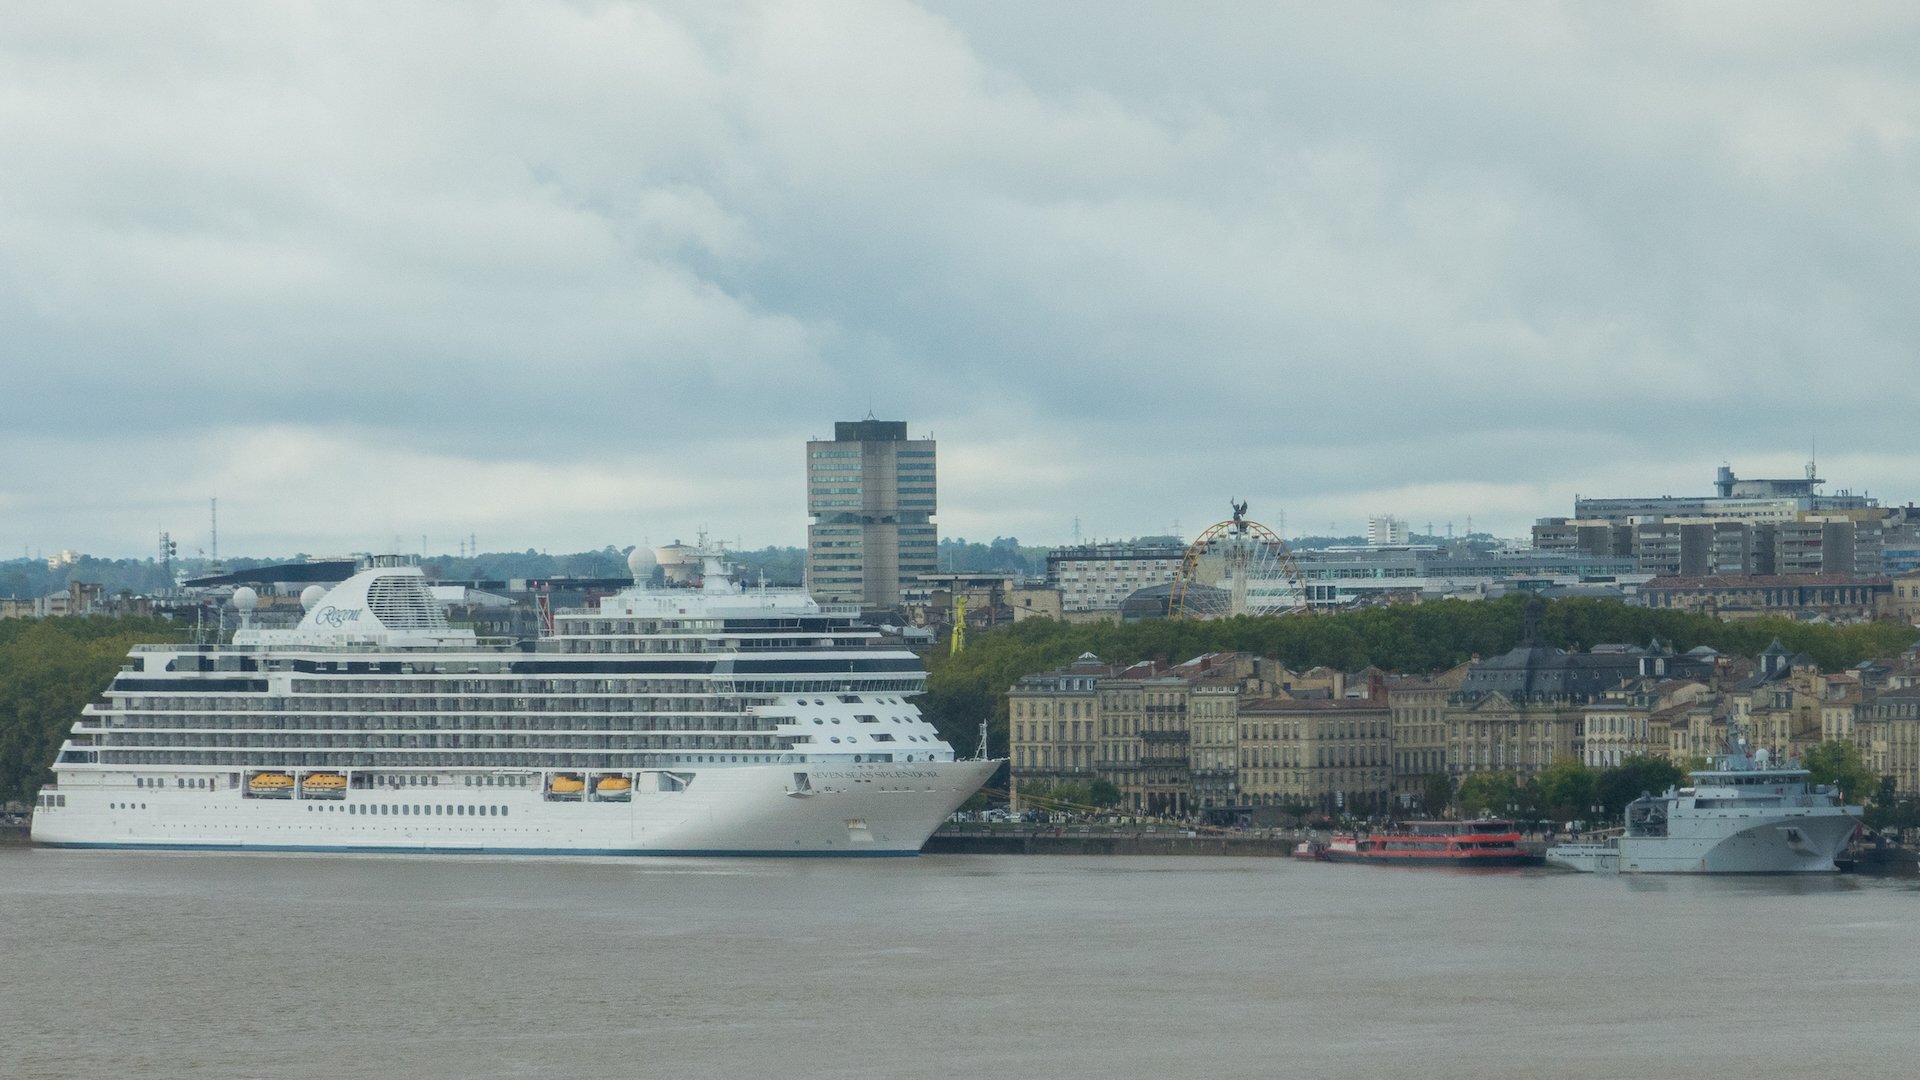  I was surprised at the size of the cruise ship that was docked on the river. 